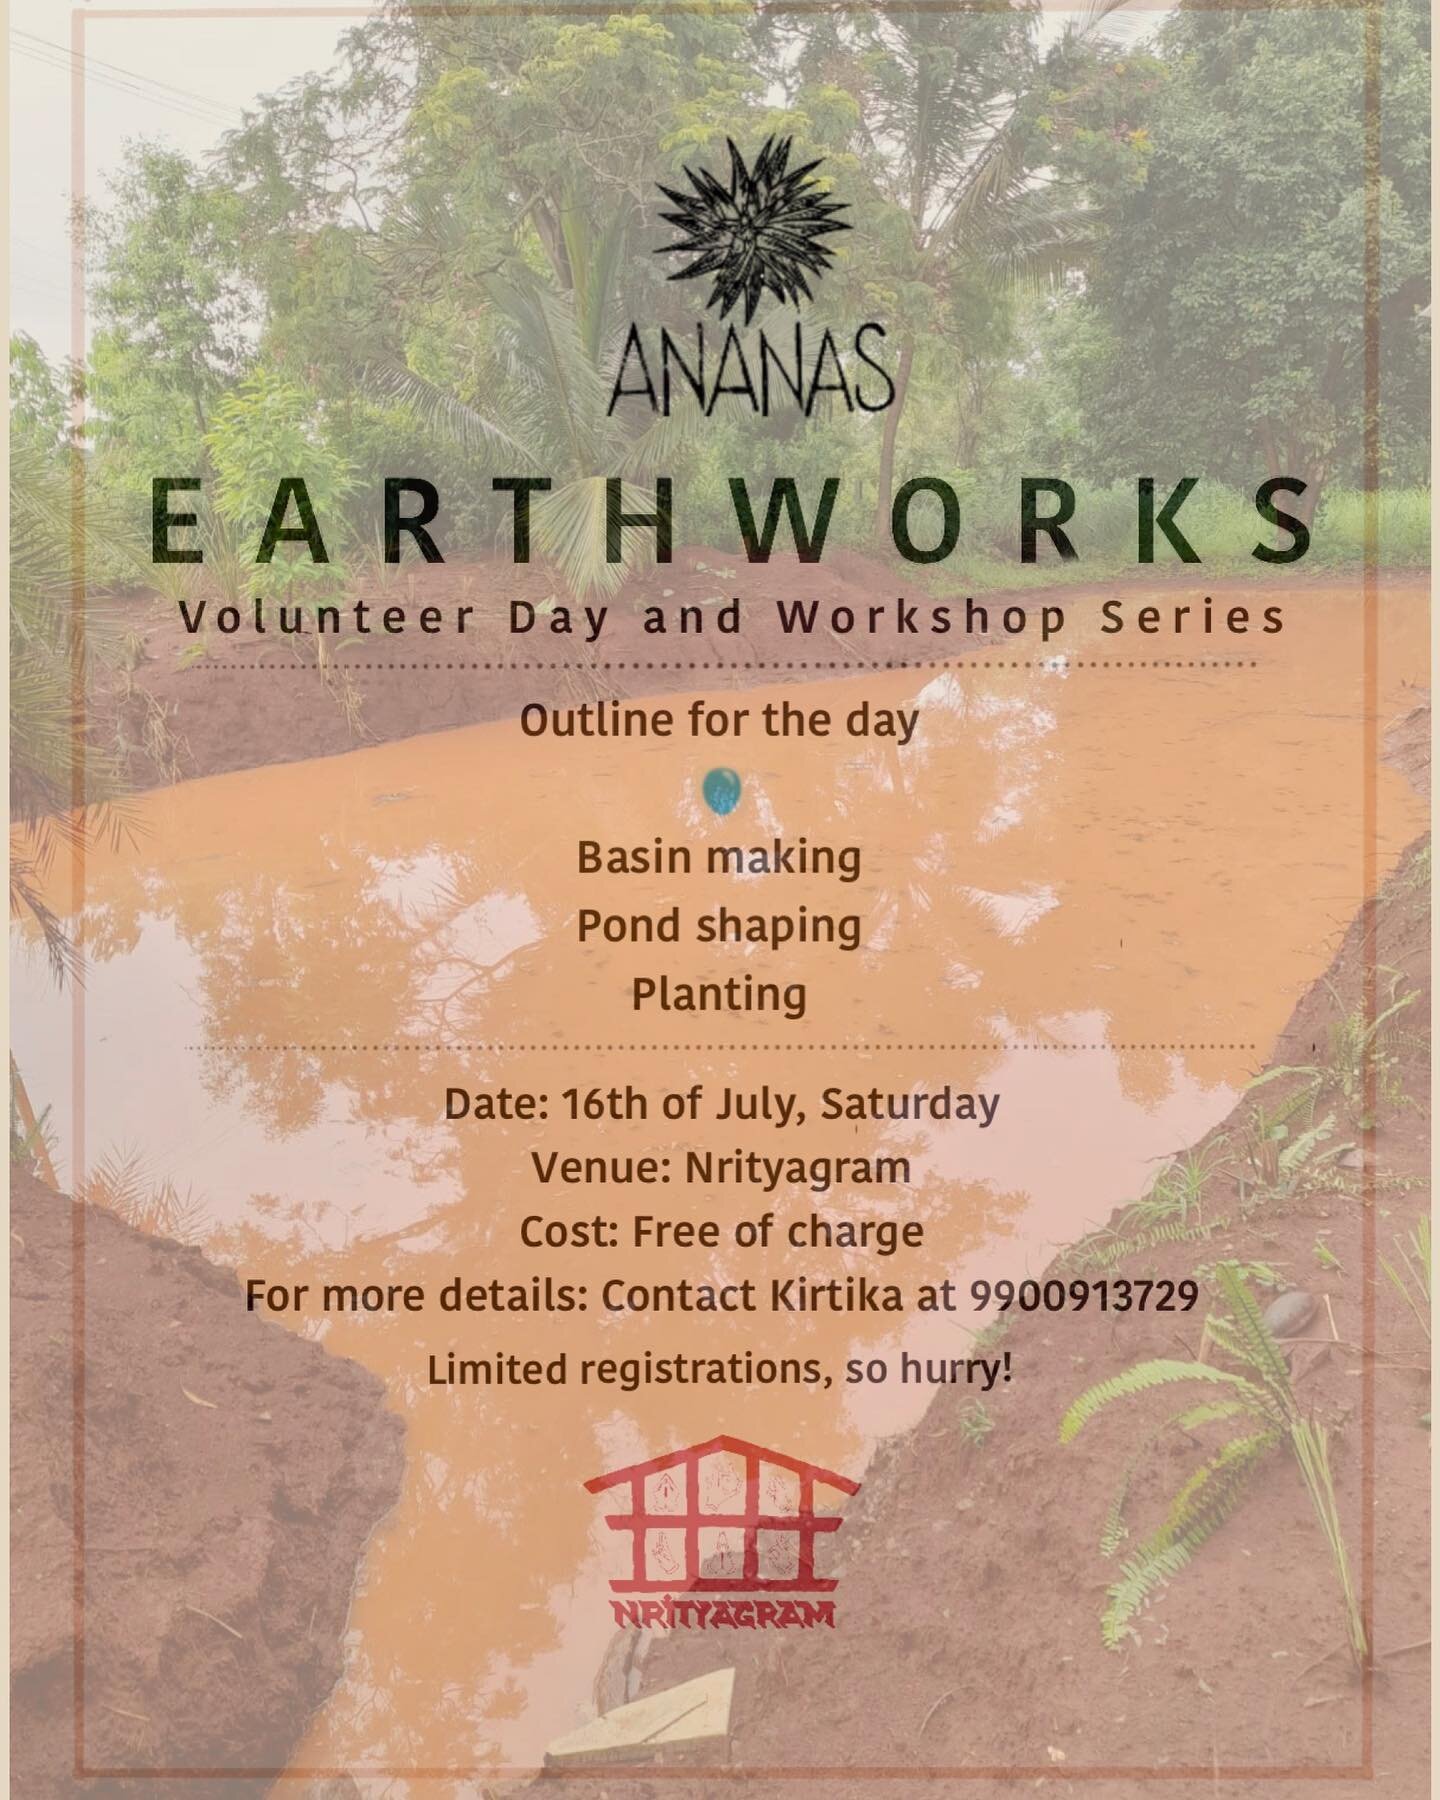 Our next volunteer day is set for 16th July, this Saturday 🌱 Hope to see you there :)

Do contact the number on the poster if you&rsquo;d like to join!

UPDATE:
Registrations for this weekend are now closed, but do let us know if you'd like to join 